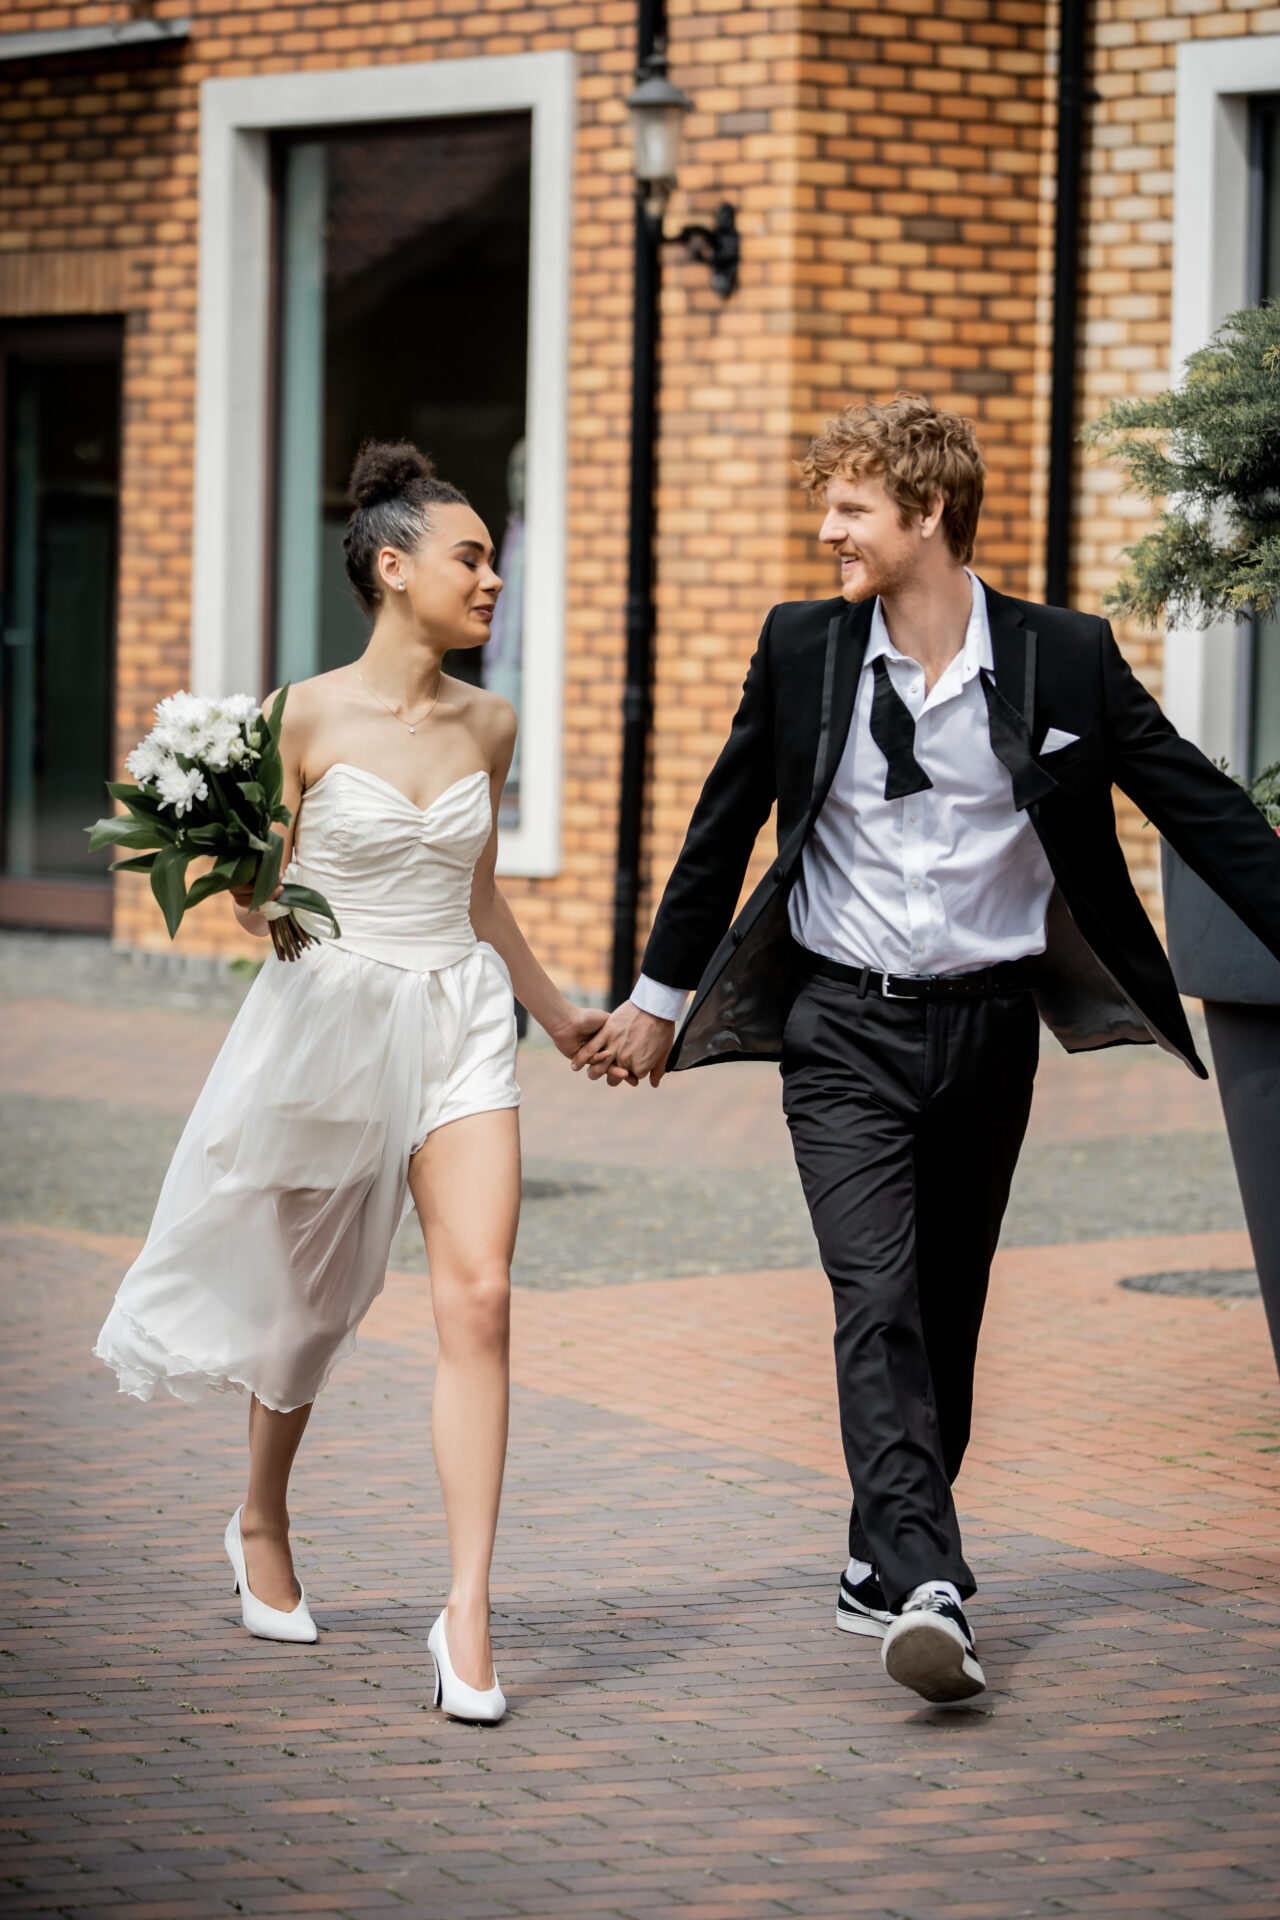 bride with flowers and groom in suit walking in city